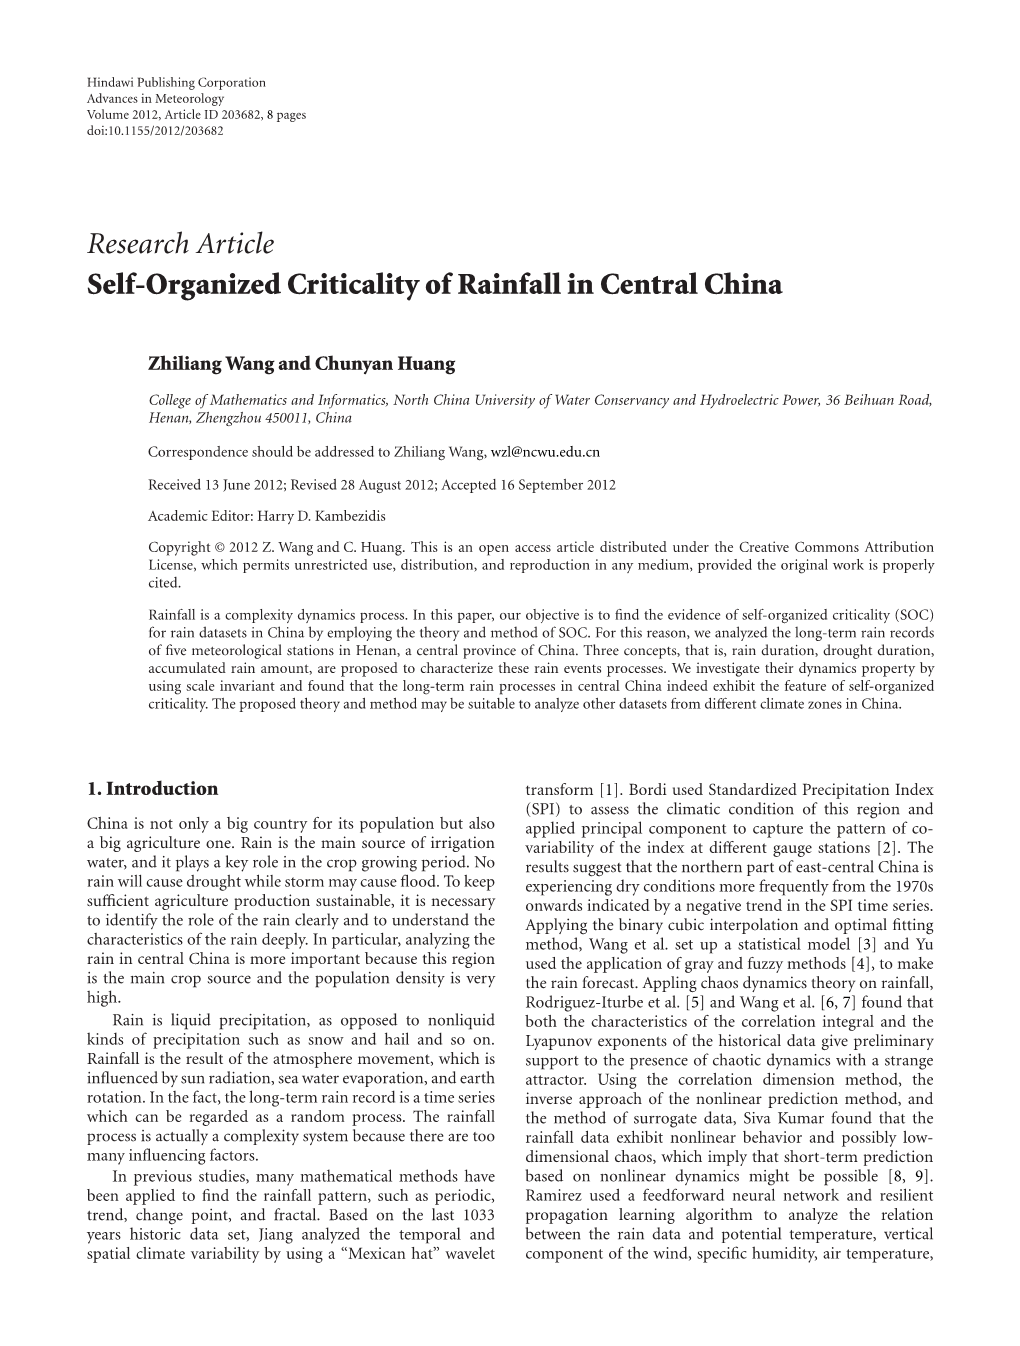 Self-Organized Criticality of Rainfall in Central China